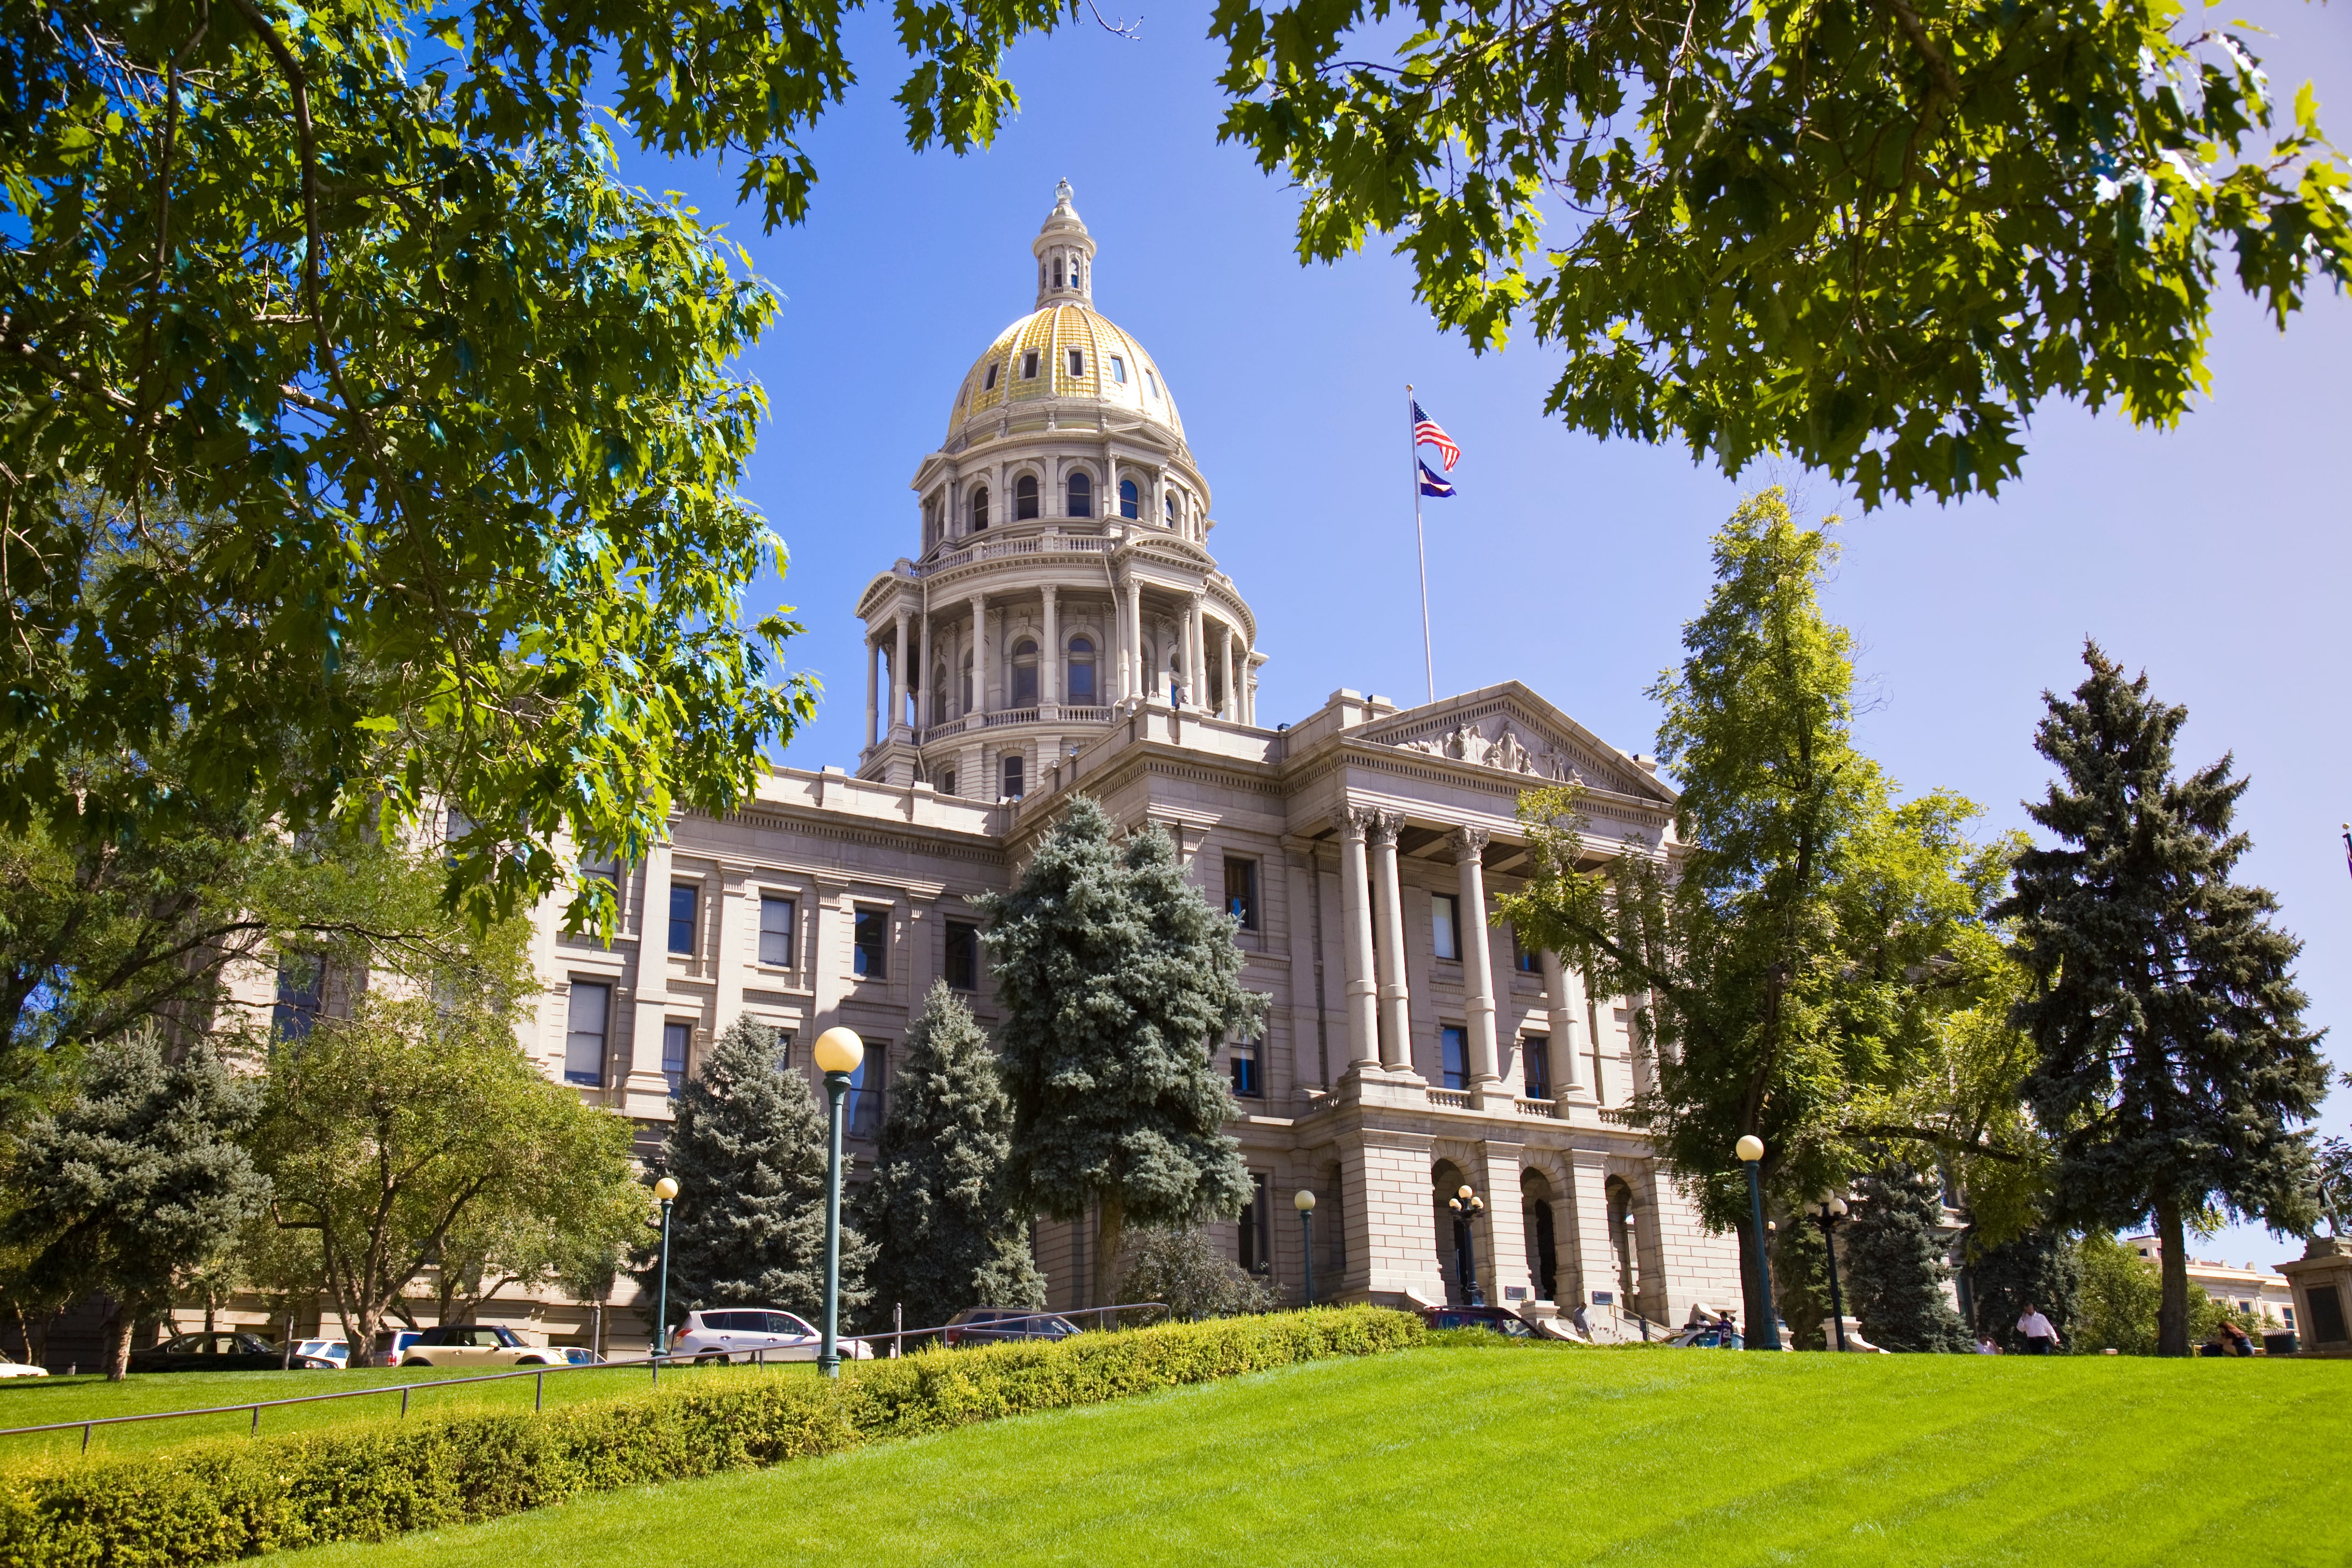 The Colorado State Capitol stands behind lush green trees on a sunny day. The flags of the United States and Colorado hang above large columns, with it's golden dome in the center of the frame.